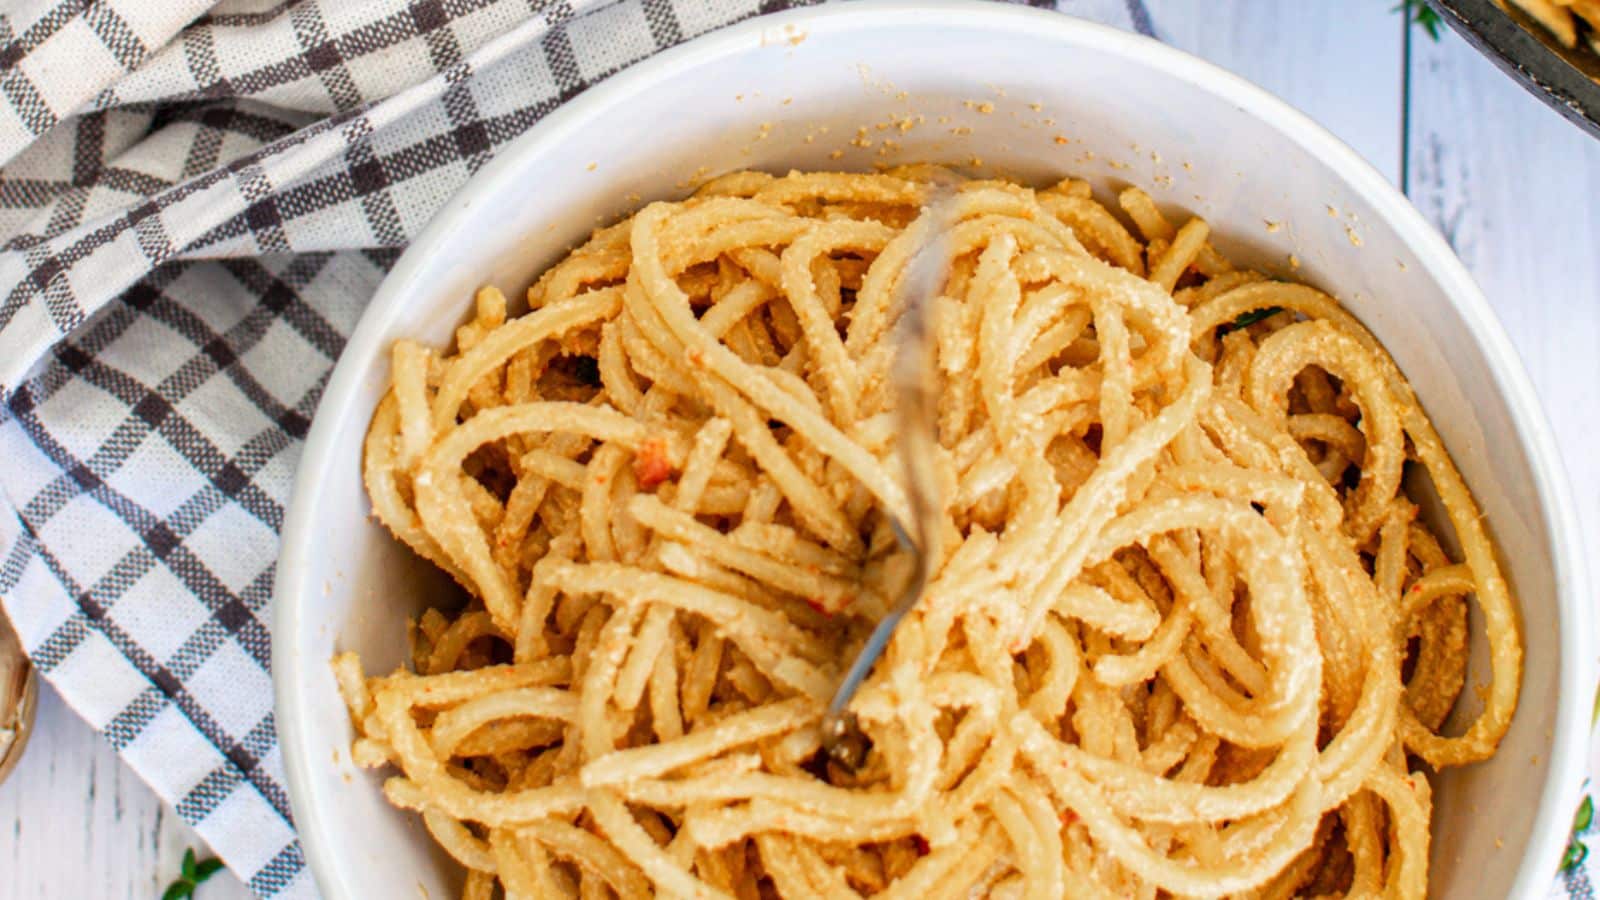 <p>This Creamy Vegan Red Pepper Pasta is a comforting dish. The creamy sauce and tender pasta create a tasty yet nourishing meal. It’s an easy, delicious way to bring some warmth to your Thursday evening.<br><strong>Get the Recipe: </strong><a href="https://twocityvegans.com/creamy-vegan-red-pepper-pasta/?utm_source=msn&utm_medium=page&utm_campaign=msn" rel="noopener">Creamy Vegan Red Pepper Pasta</a></p>